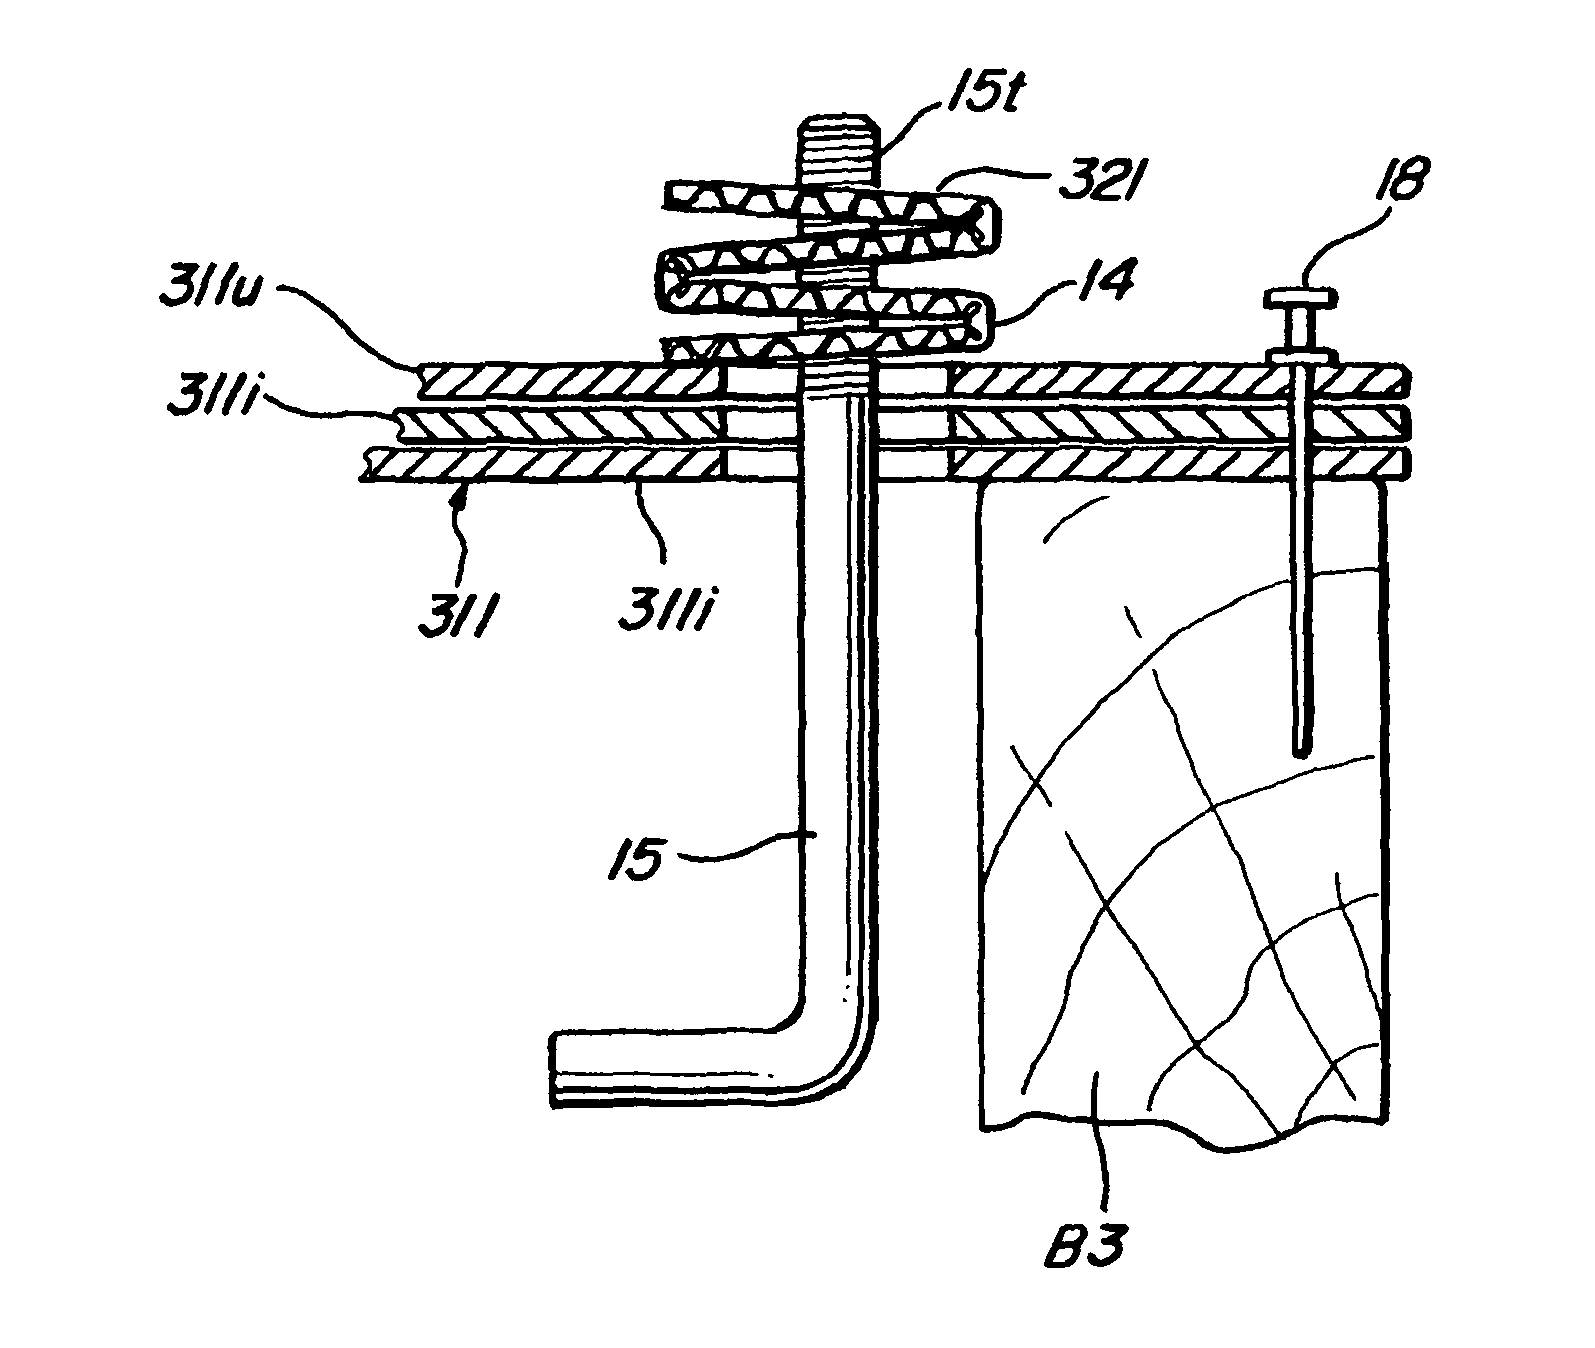 Biodegradable structures for suspending anchor bolts